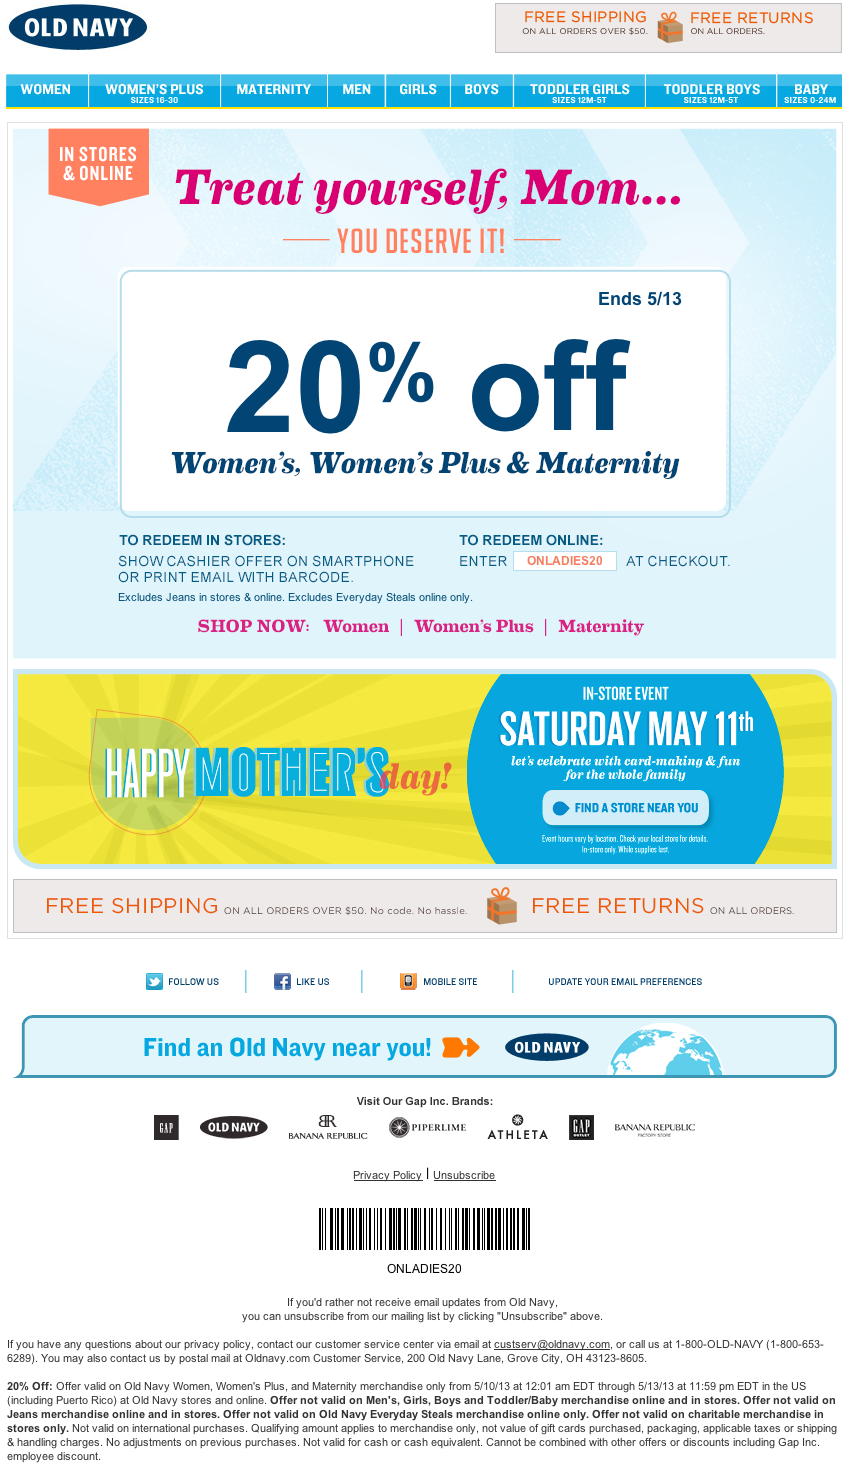 Old Navy: 20% off Women's Printable Coupon